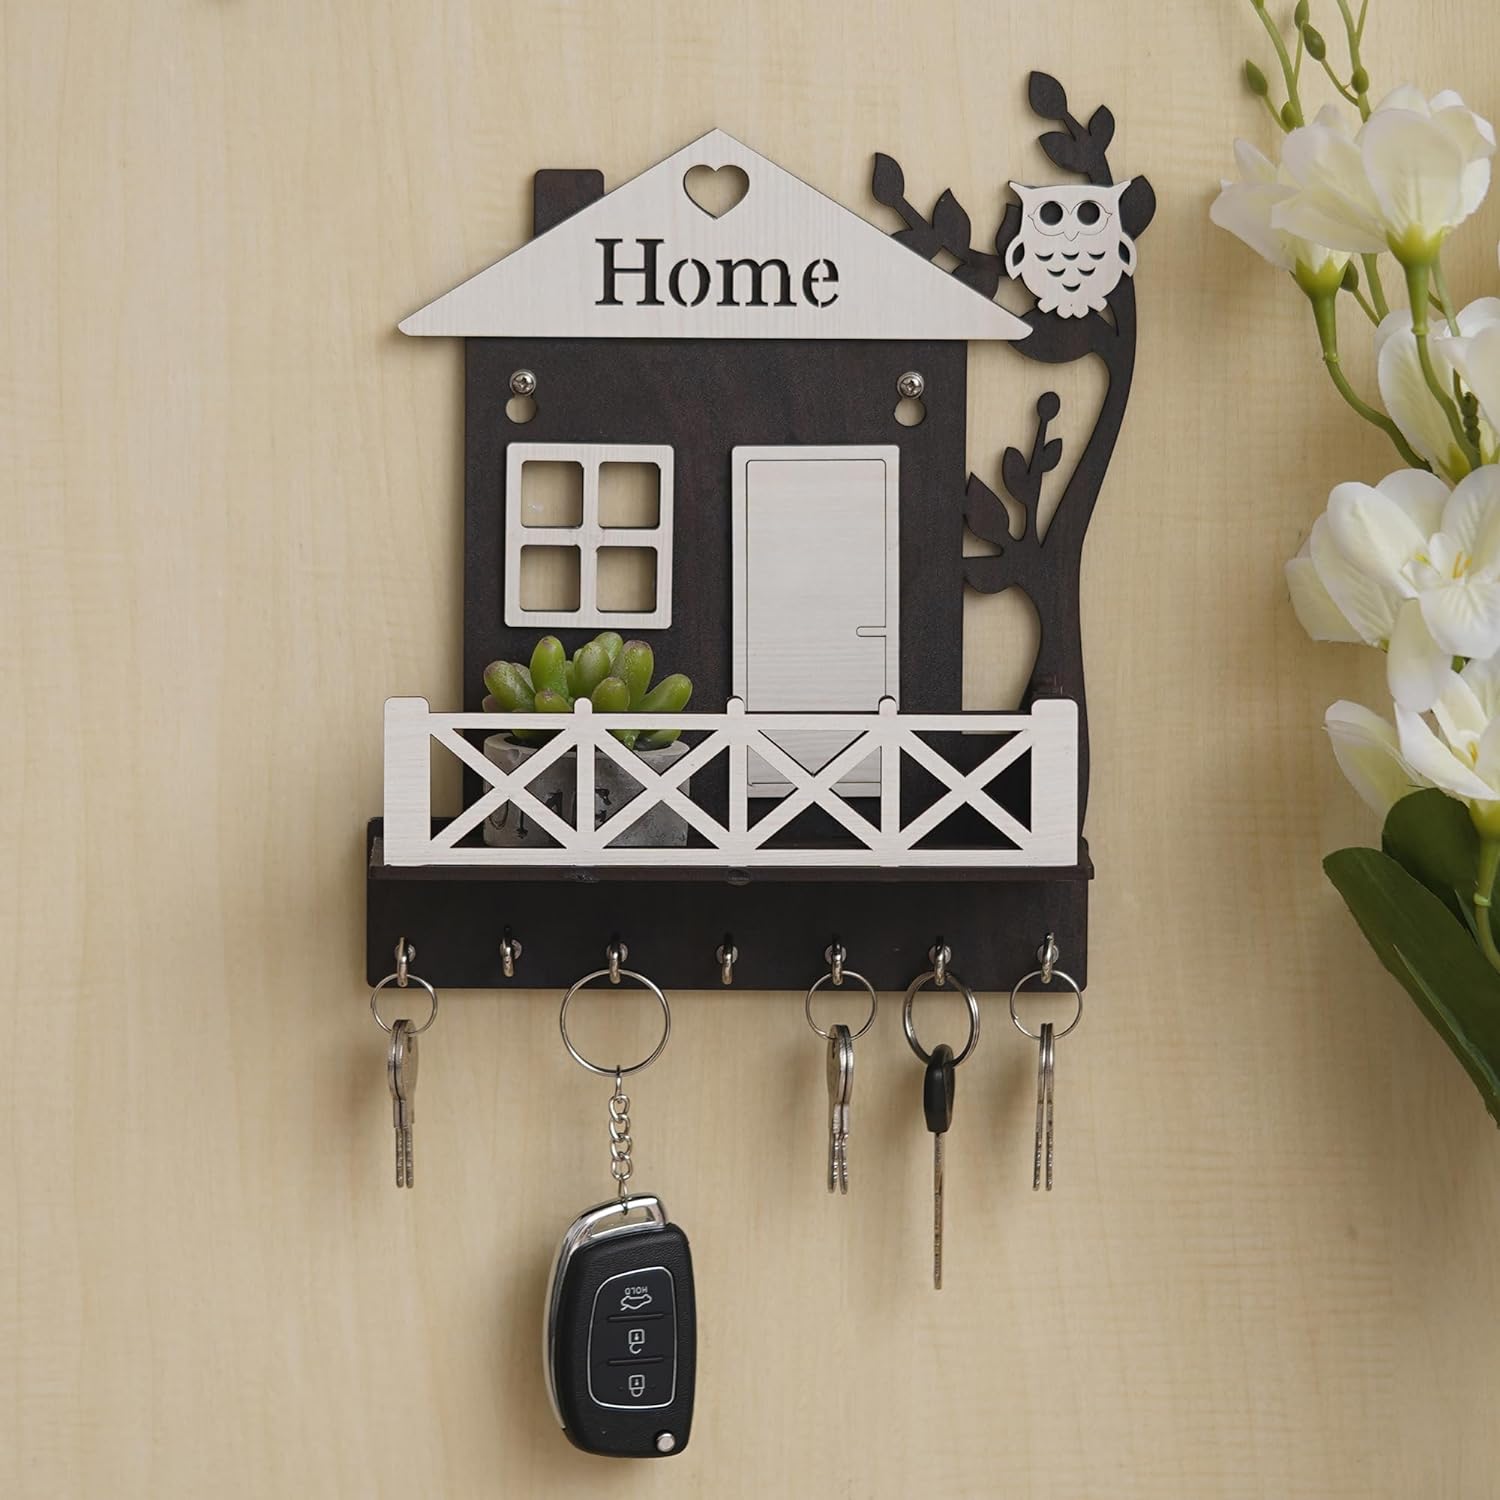 Key Holder Review: Stylish and Functional Storage Solution